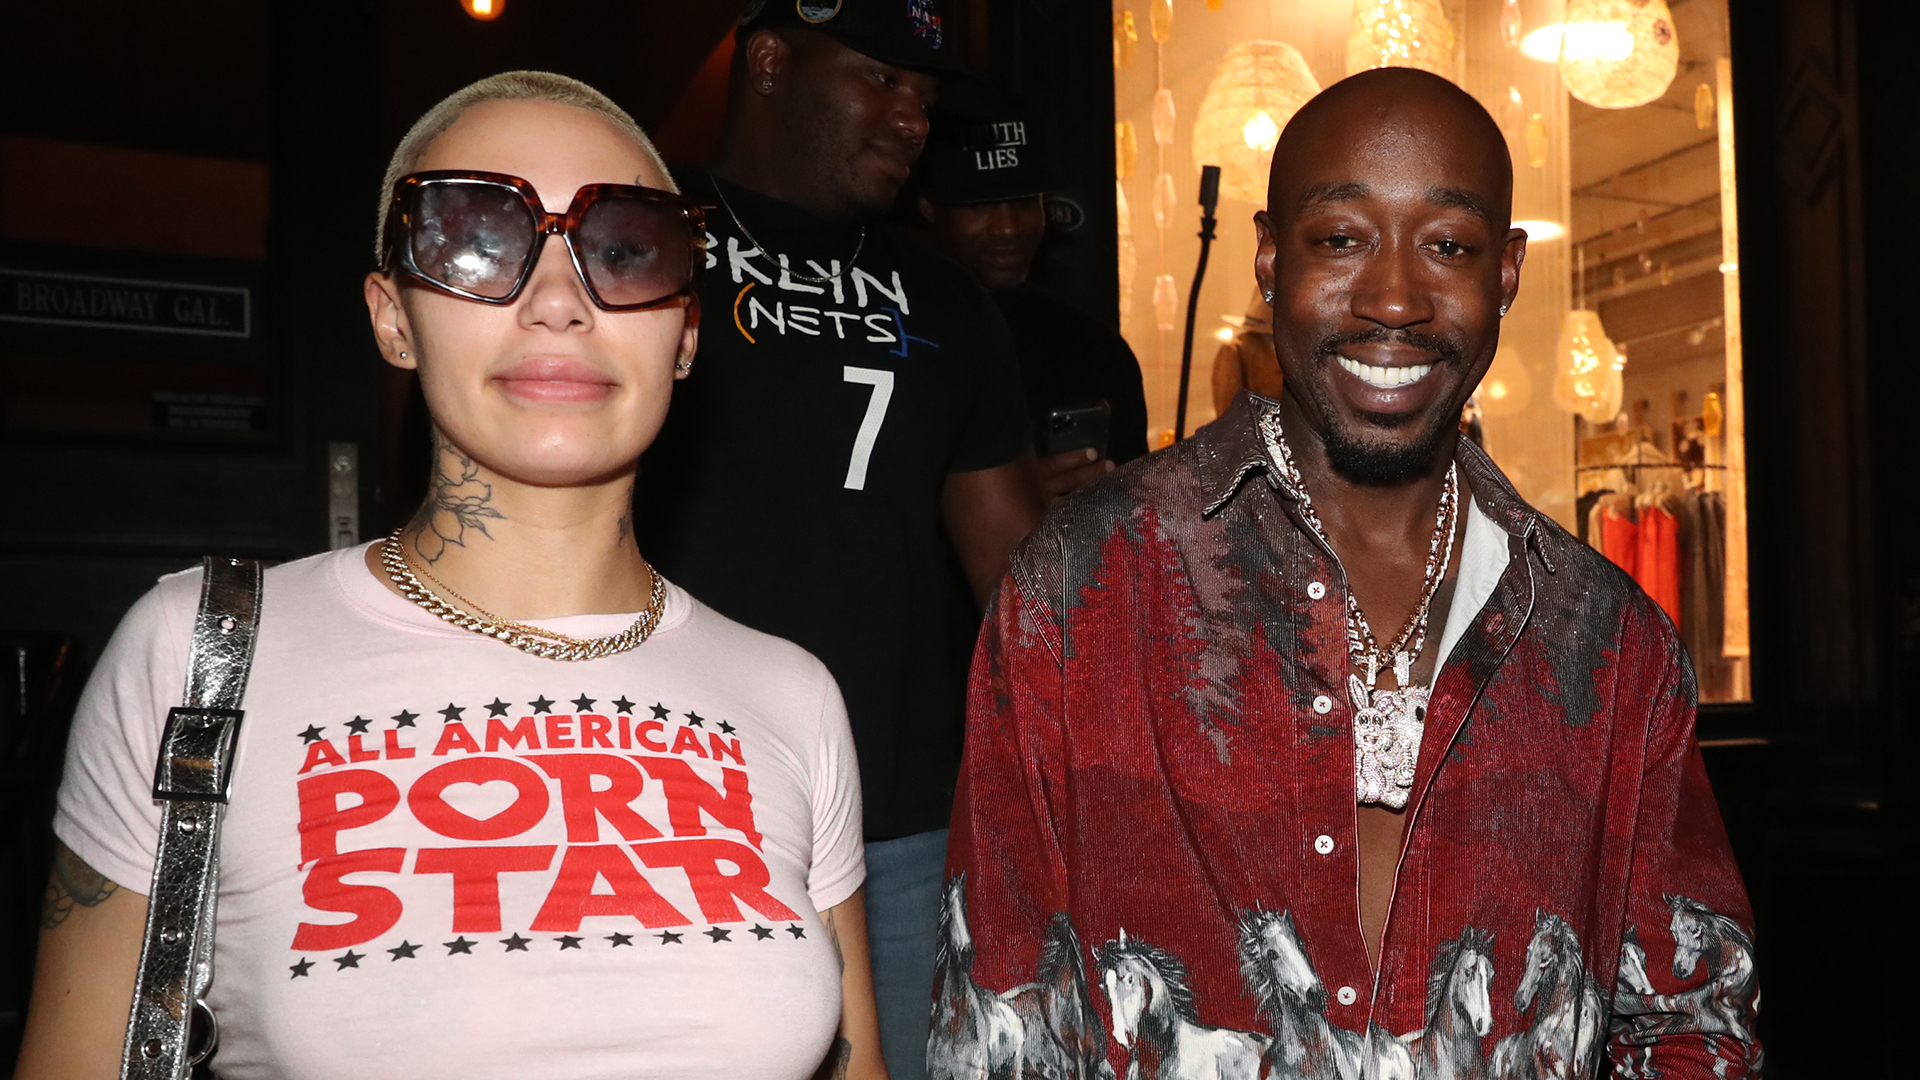 Freddie Gibbs Ex Claims She Stopped Paying His Phone Bill Once He Ghosted Her After Finding Out She Was Pregnant Complex photo